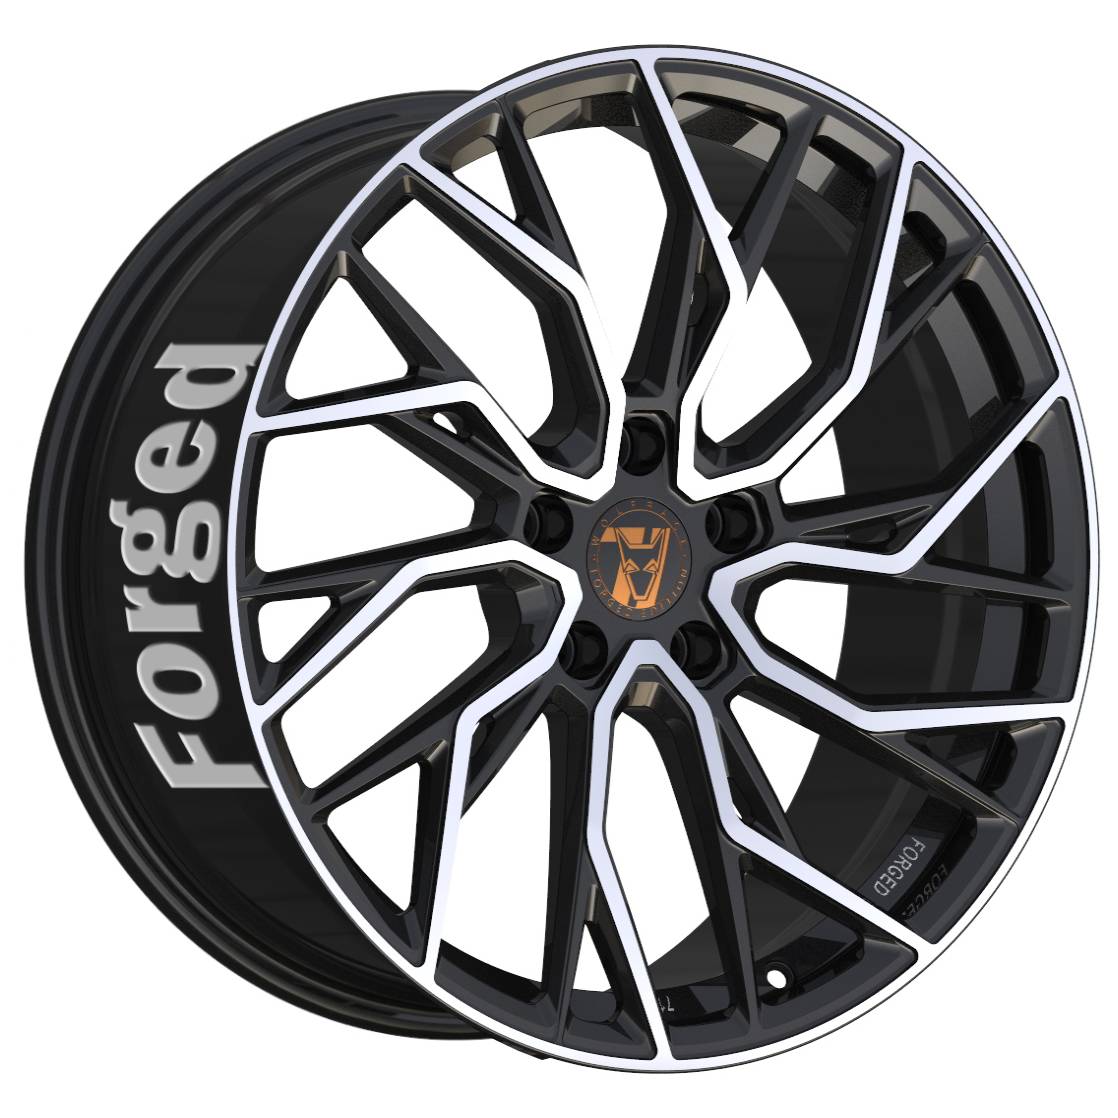 Demon Wheels 71 Forged Edition Voodoo Forged [13x23] -5x114.3- ET 30